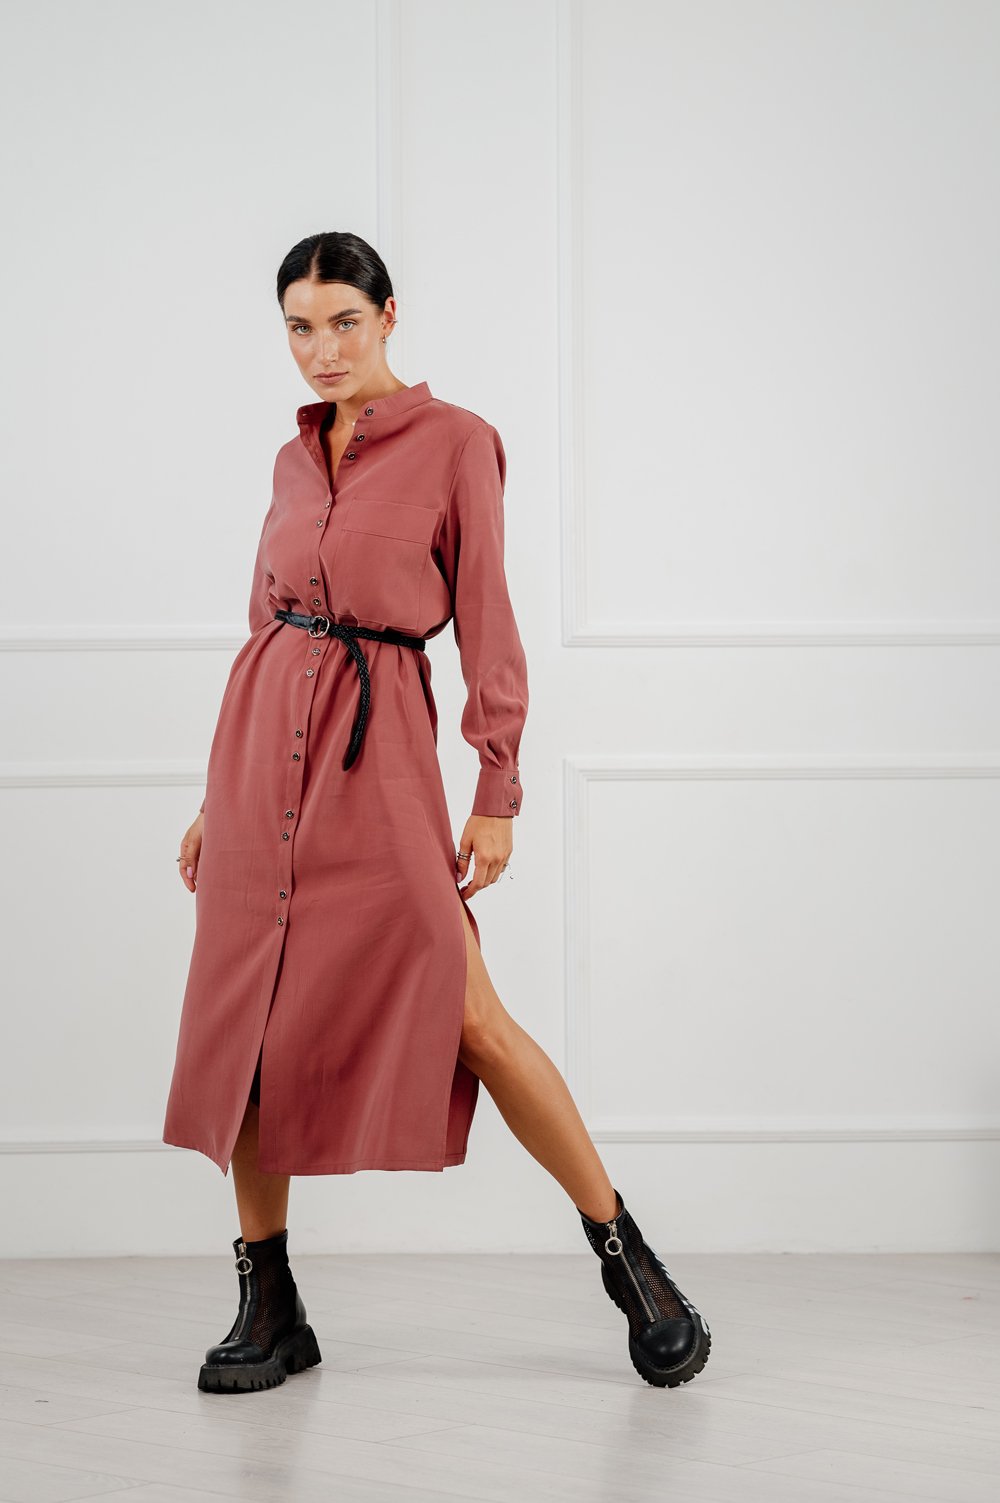 Midi dress in a shade of 